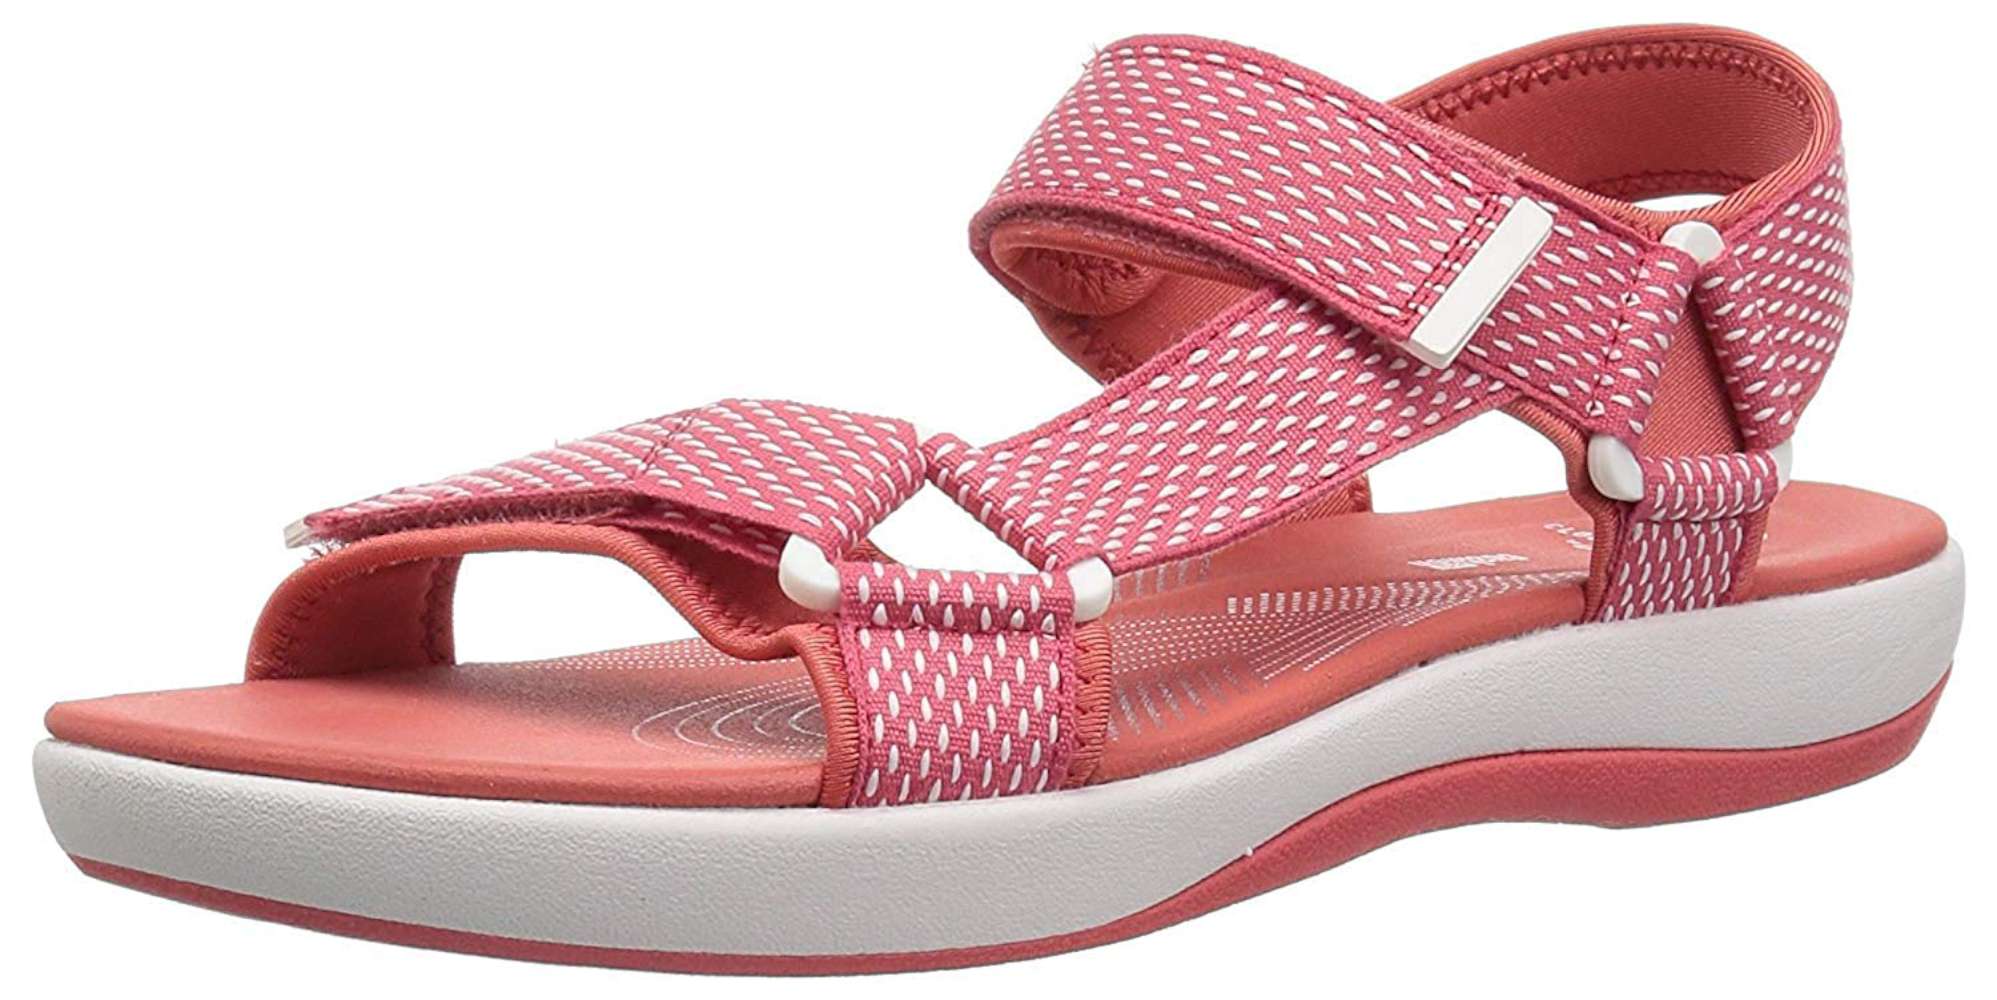 Clarks Womens Brizo Cady Fabric Open Toe Casual Sport Sandals, Coral ...